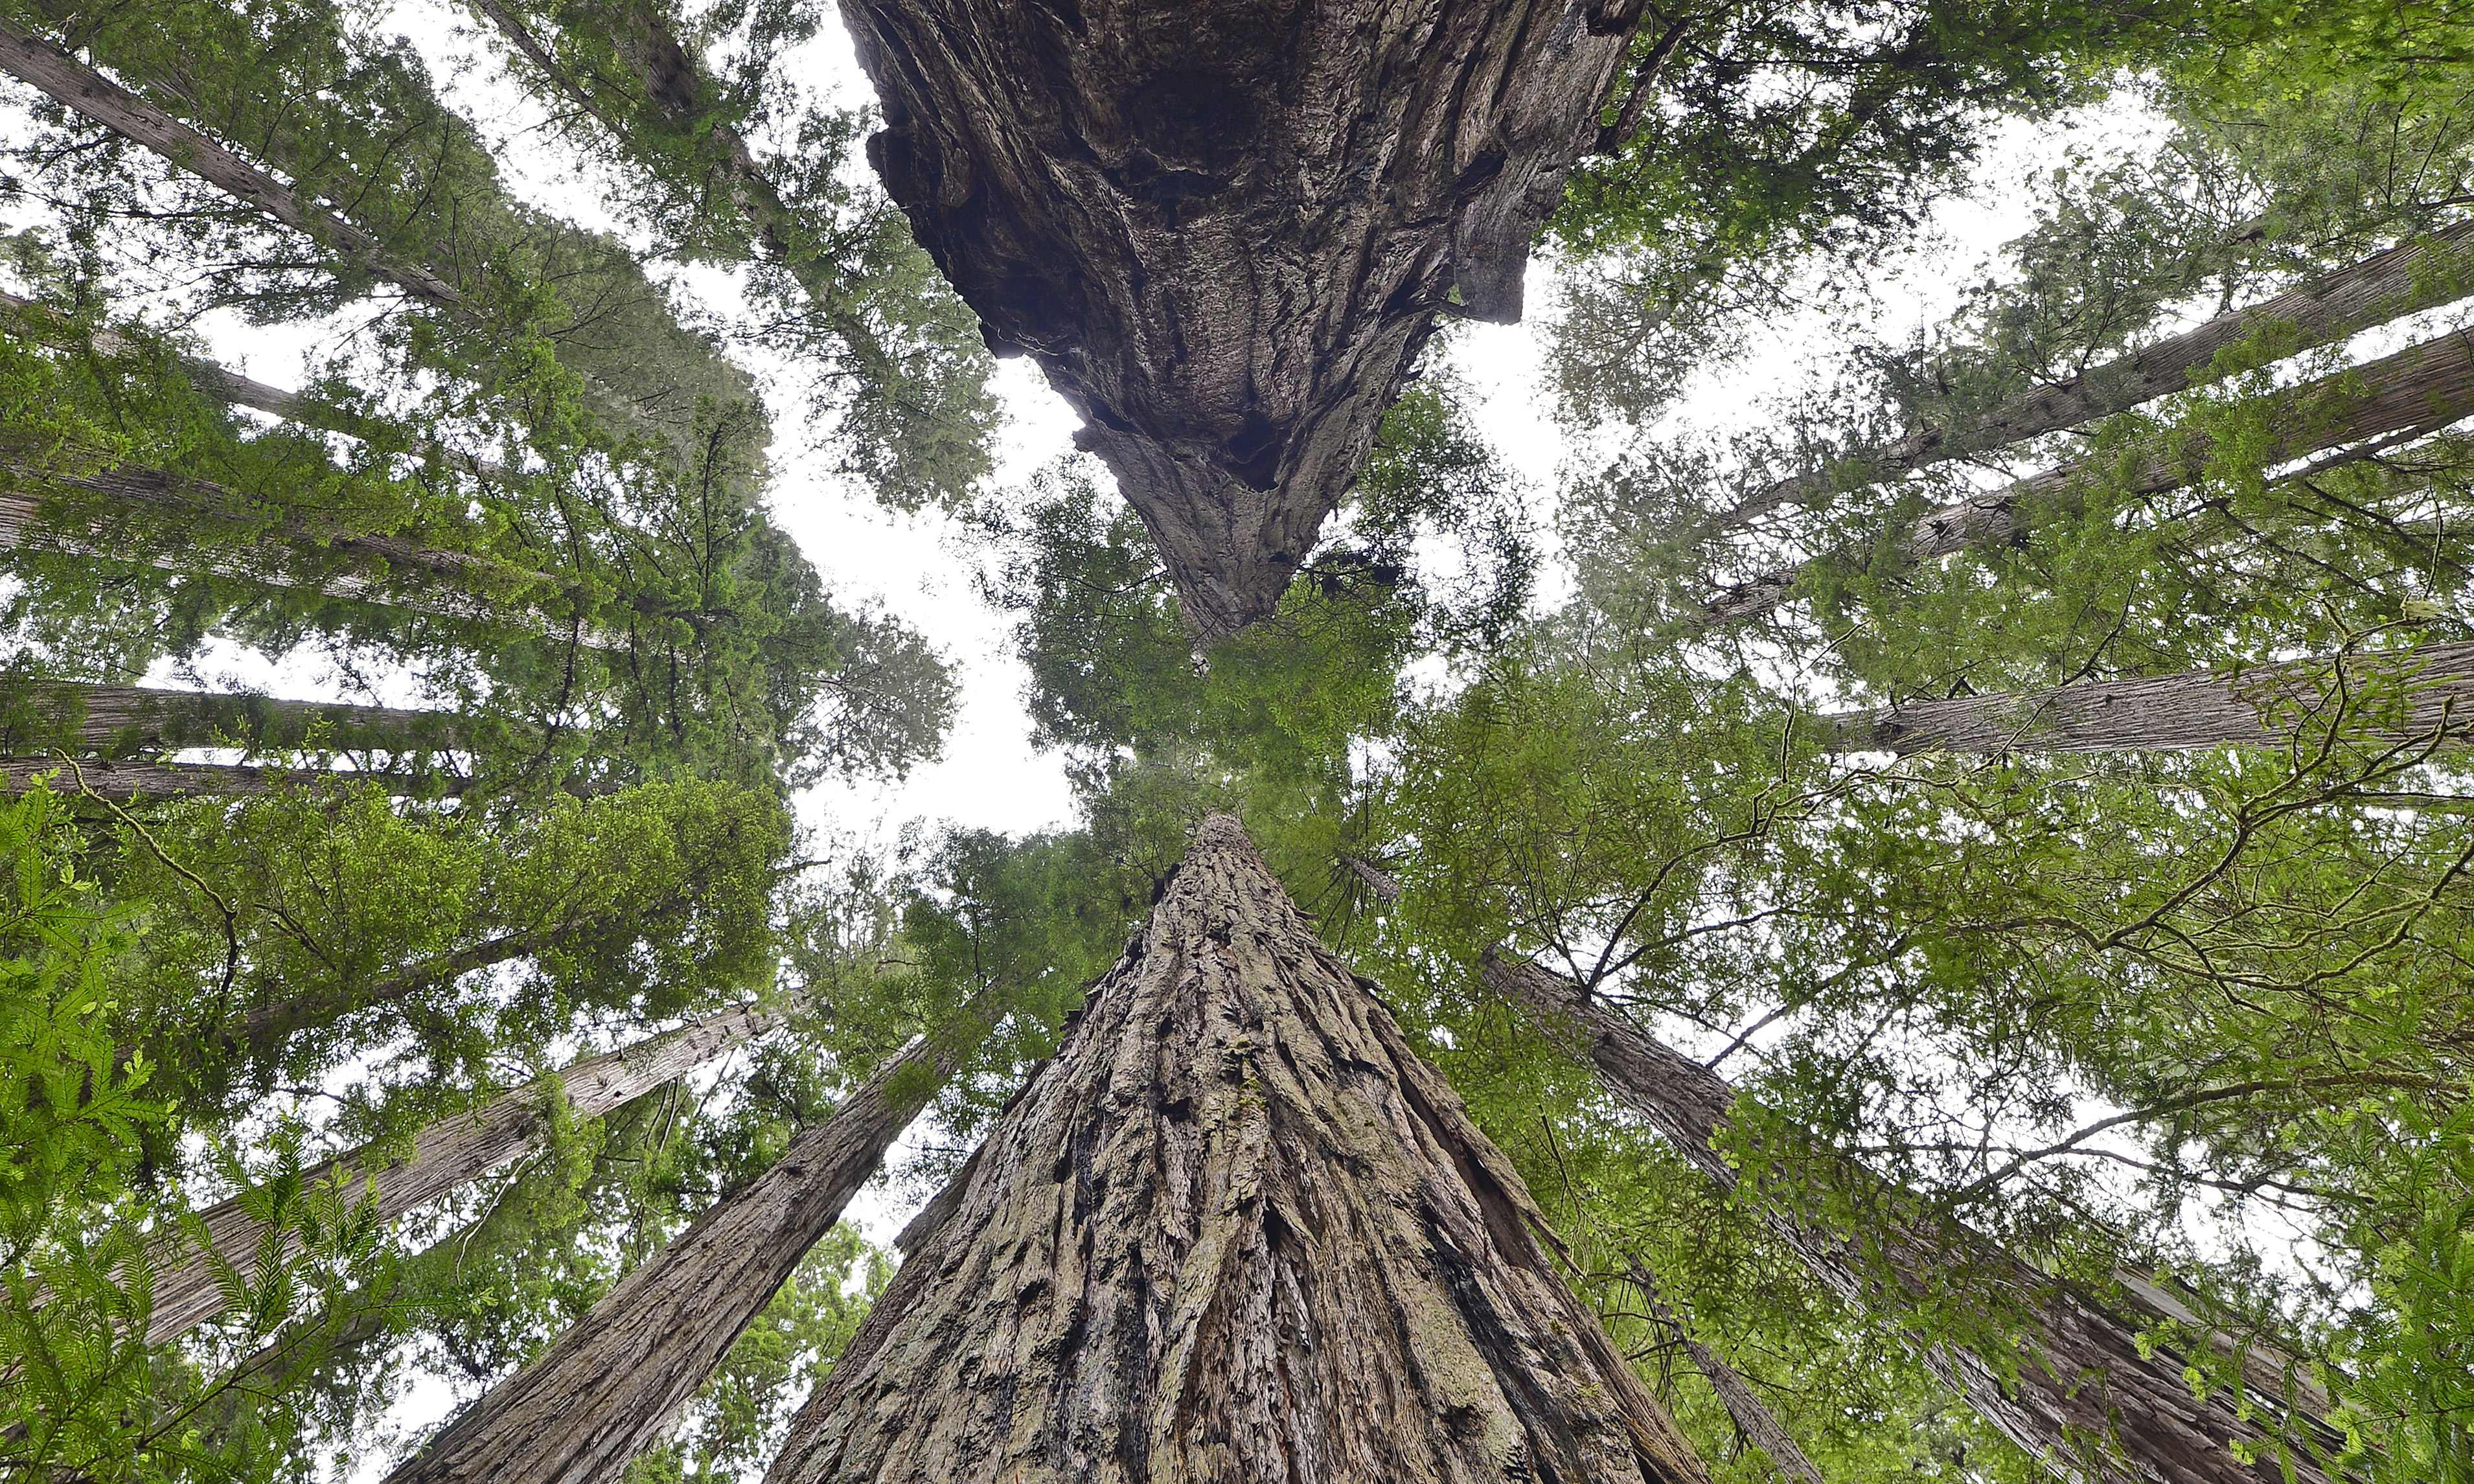 Thinking Long-Term: Why We Should Bring Back Redwood Forests